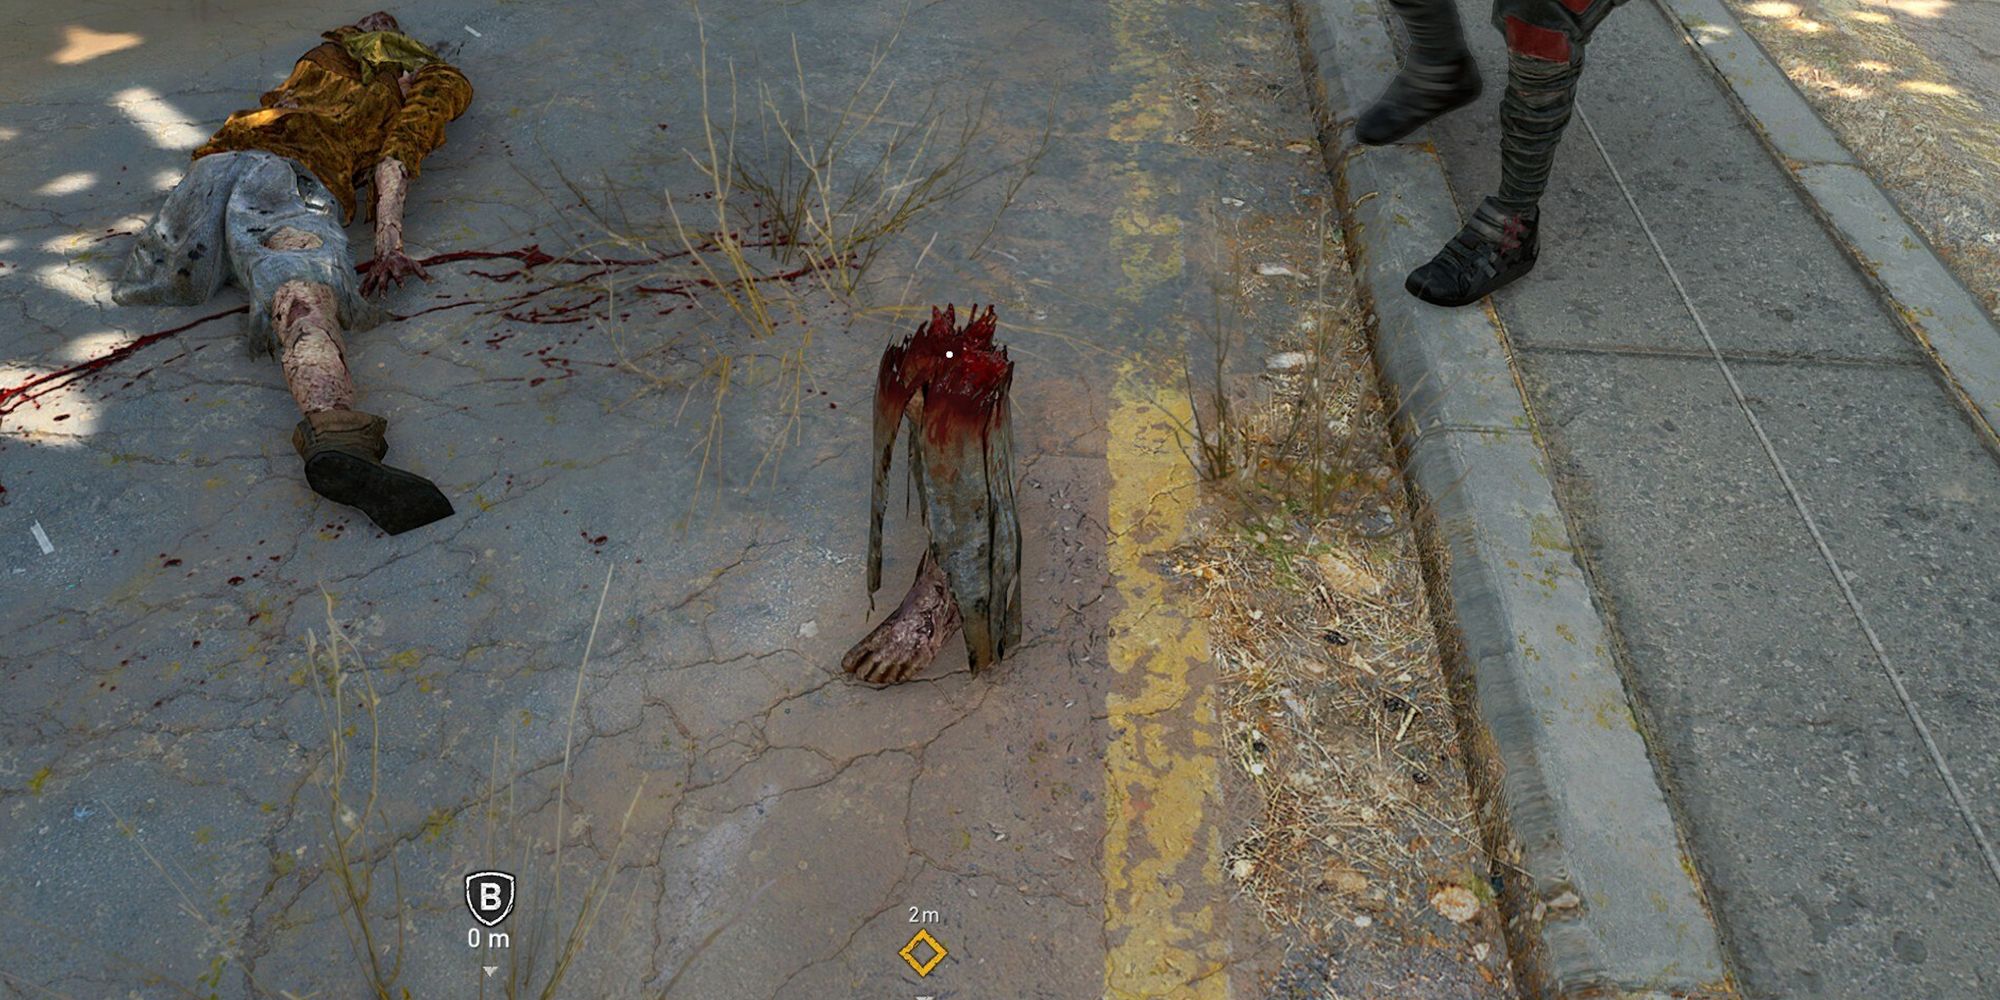 Dying Light 2 - An Infected On The Ground With His Own Leg Standing Up